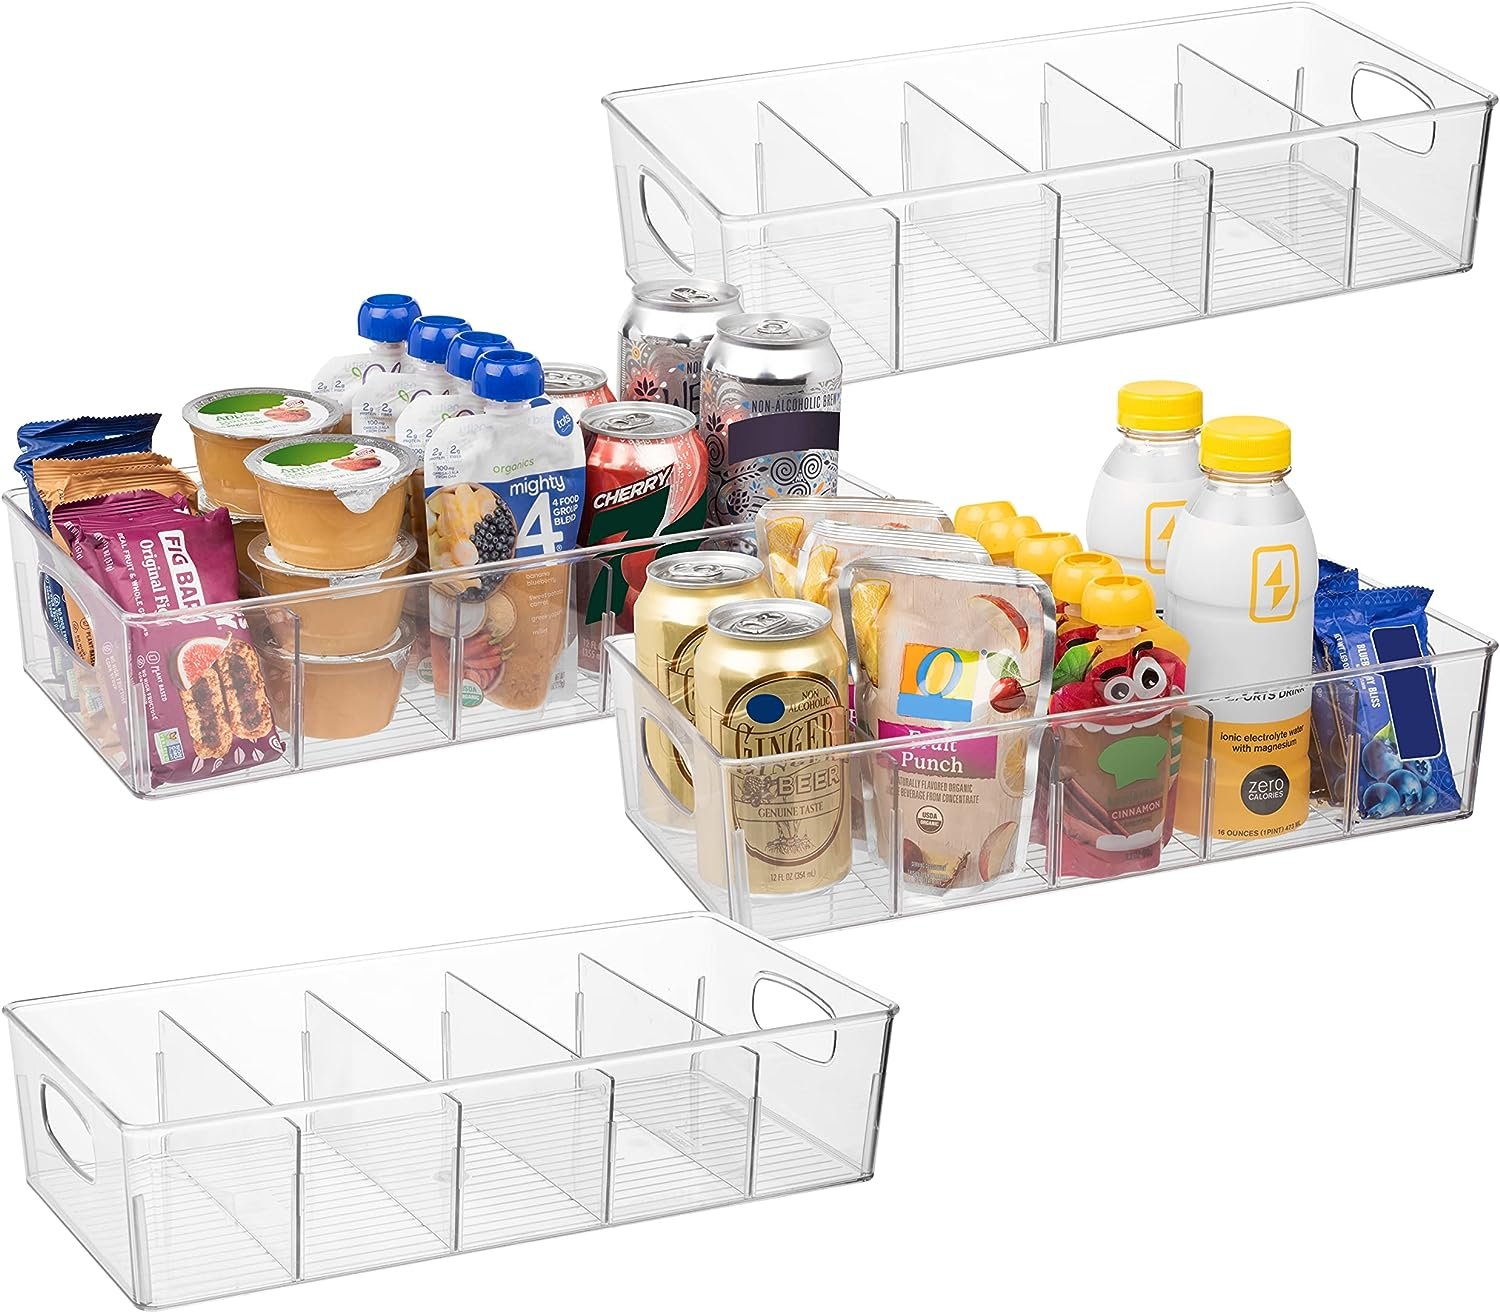 ClearSpace Plastic Pantry Organization and Storage Bins with Removable Dividers – XL Perfect for Kitchen,Refrigerator, Cabinet, 4 Pack